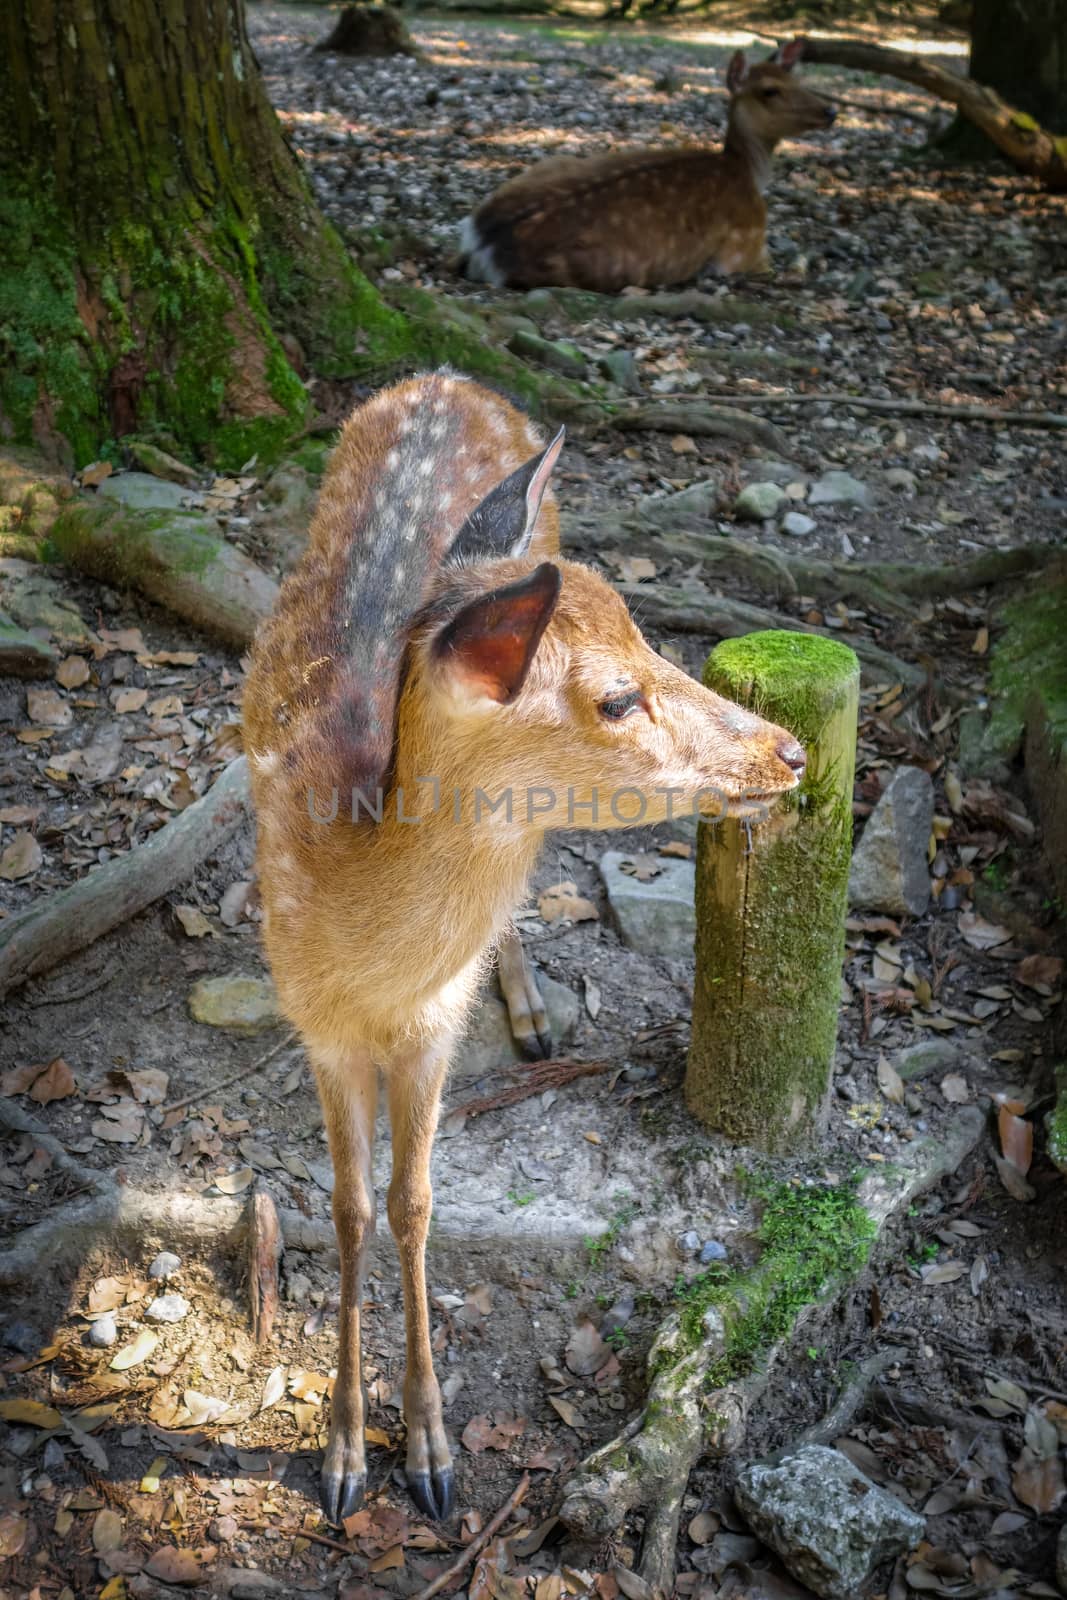 Sika fawn deer in Nara Park forest, Japan by daboost